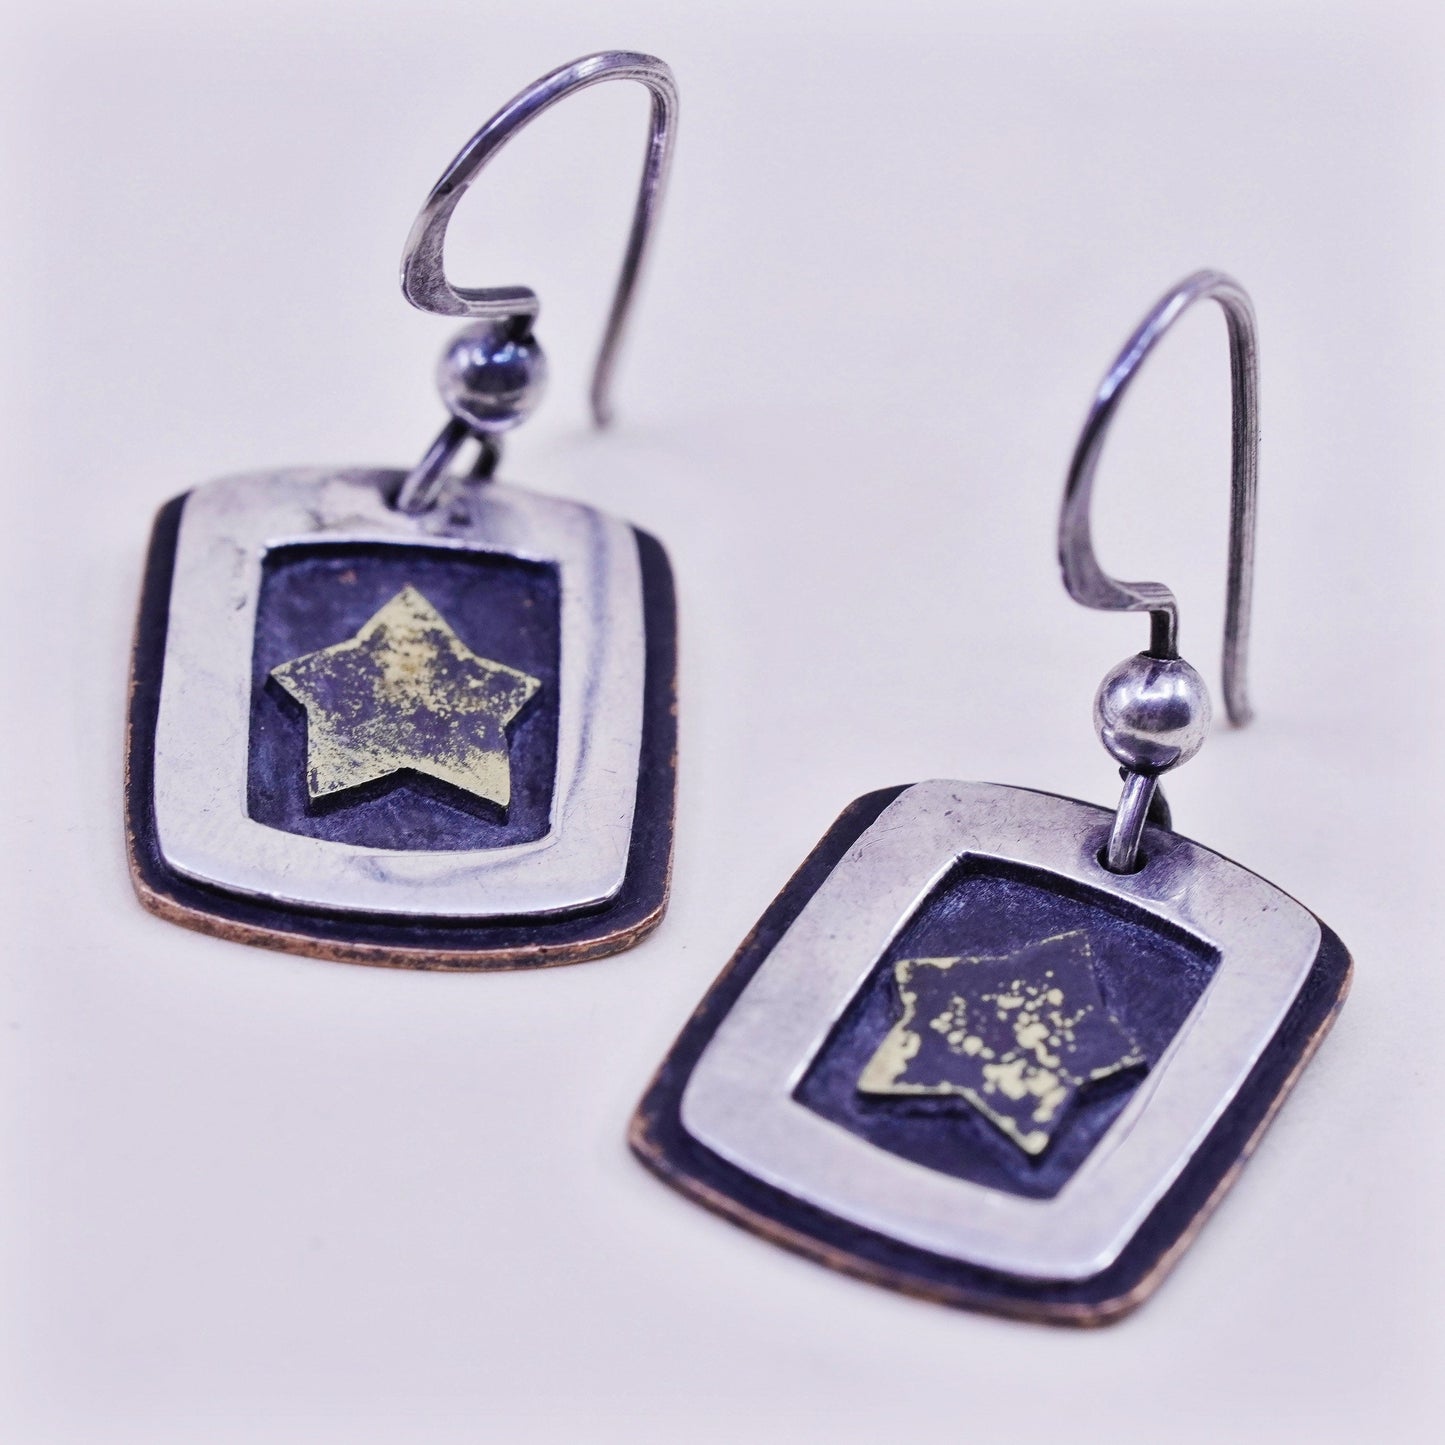 Vintage sterling silver handmade earrings, 925 tag with brass star